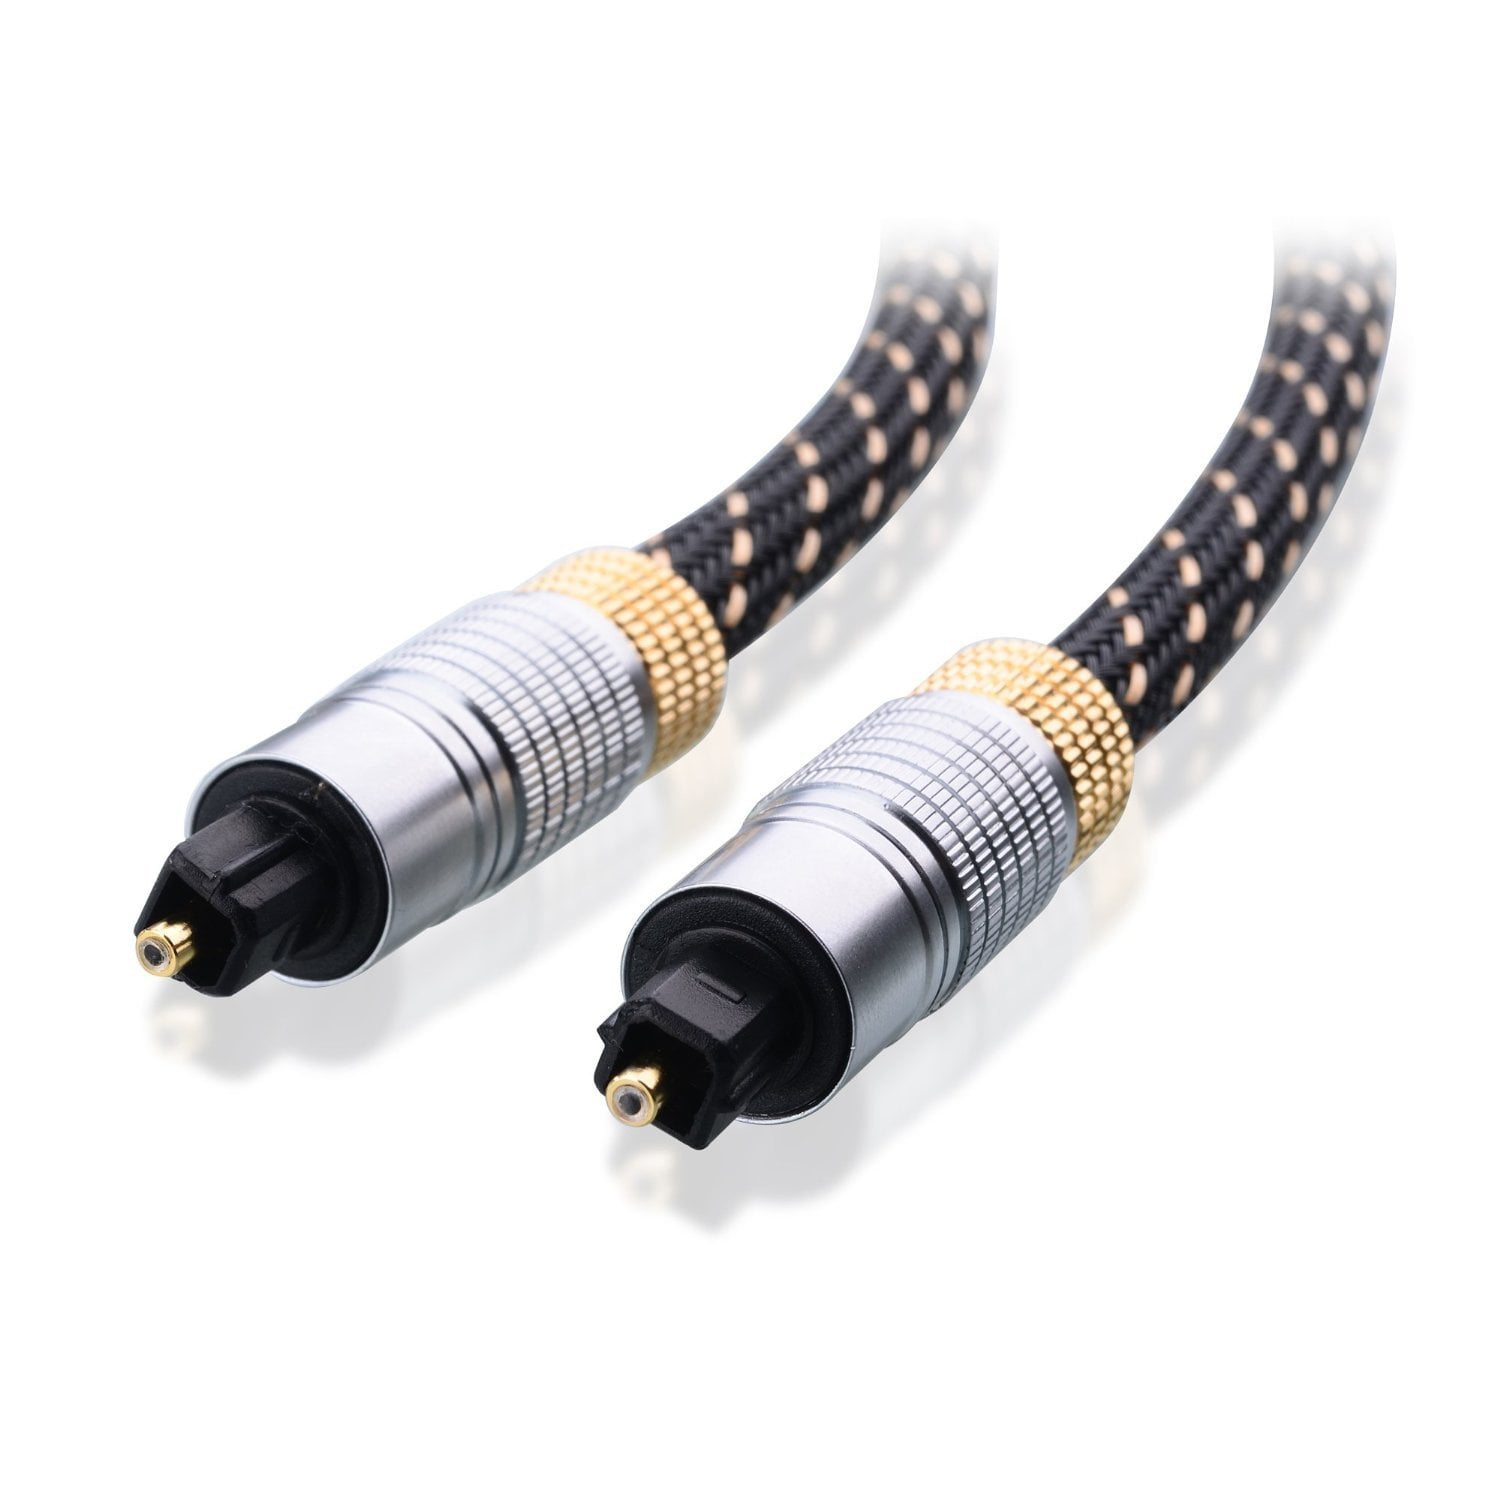 Optical Audio Cable Extension Coupler, Male Digital Adapter Mini Toslink NANYI Toslink Female to 3.5mm Jack 2Pack 